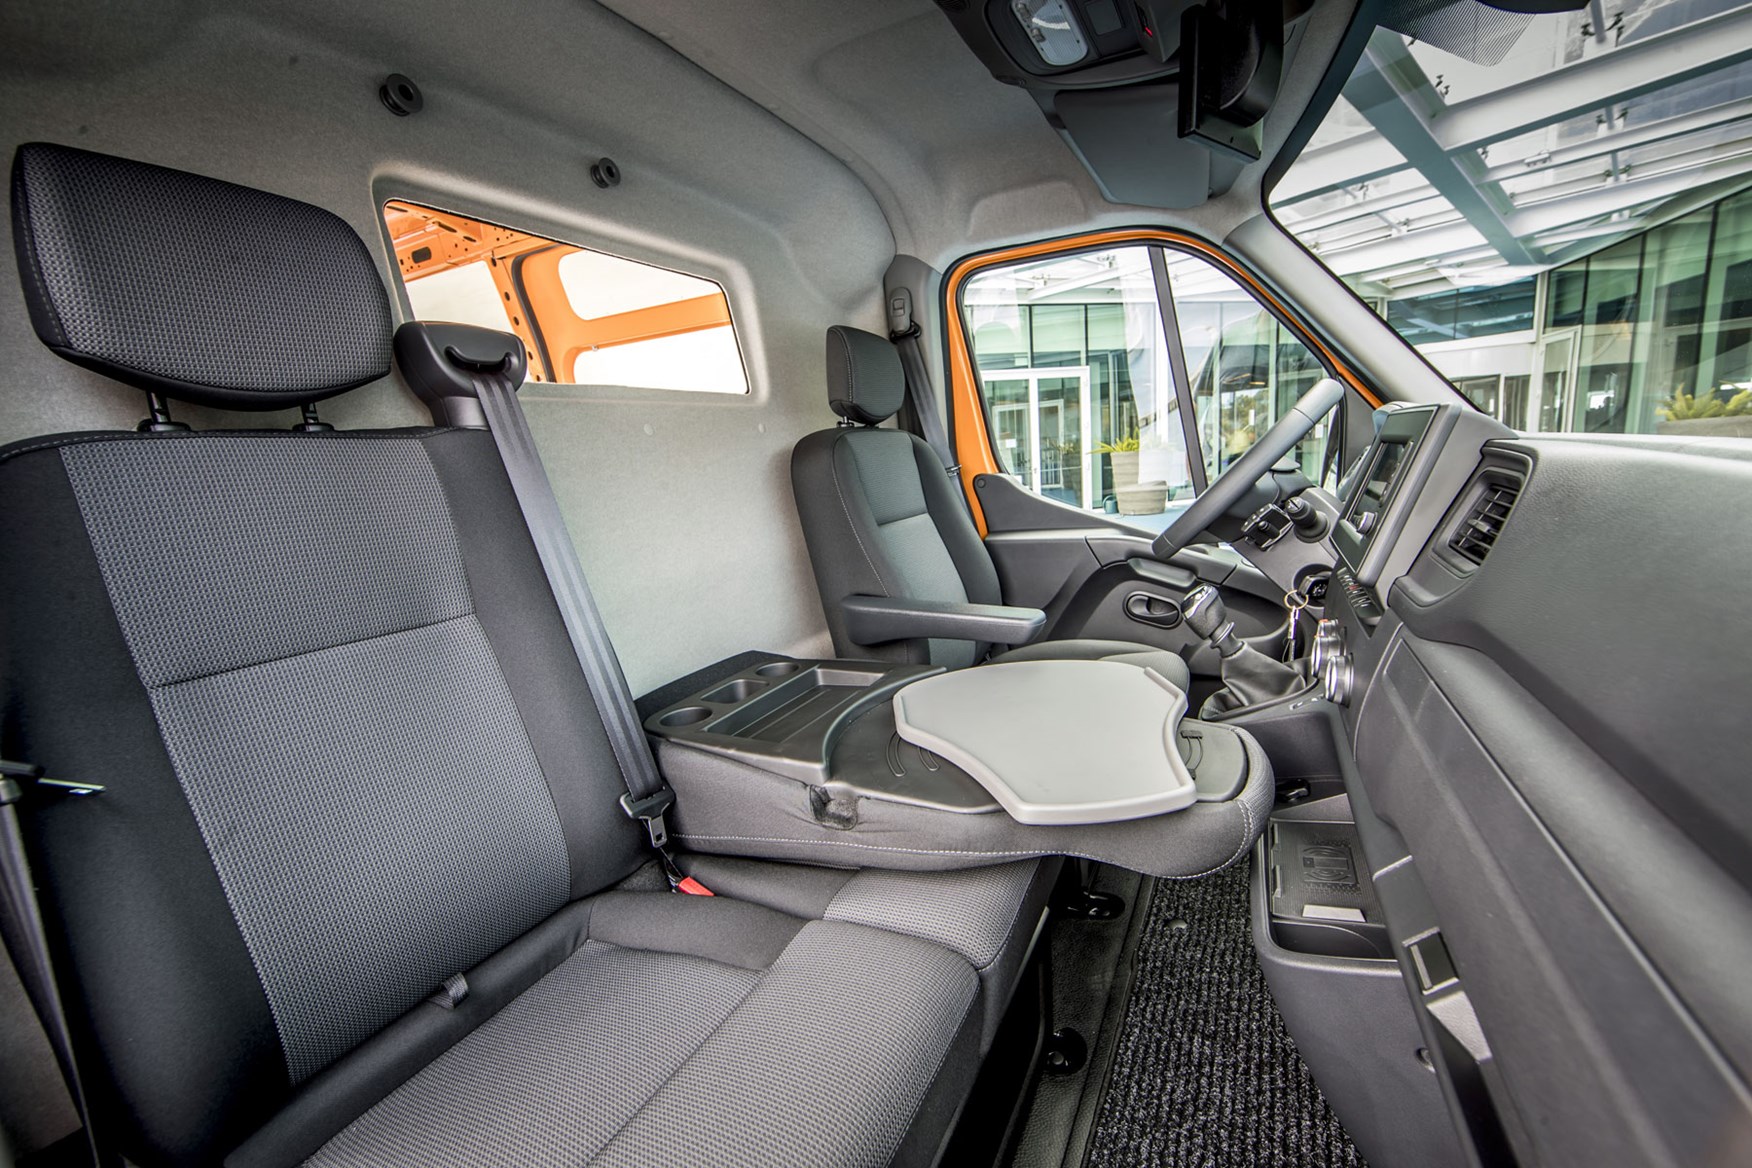 Renault Master review - 2019 facelift cab interior showing mobile office with swiveling laptop tray